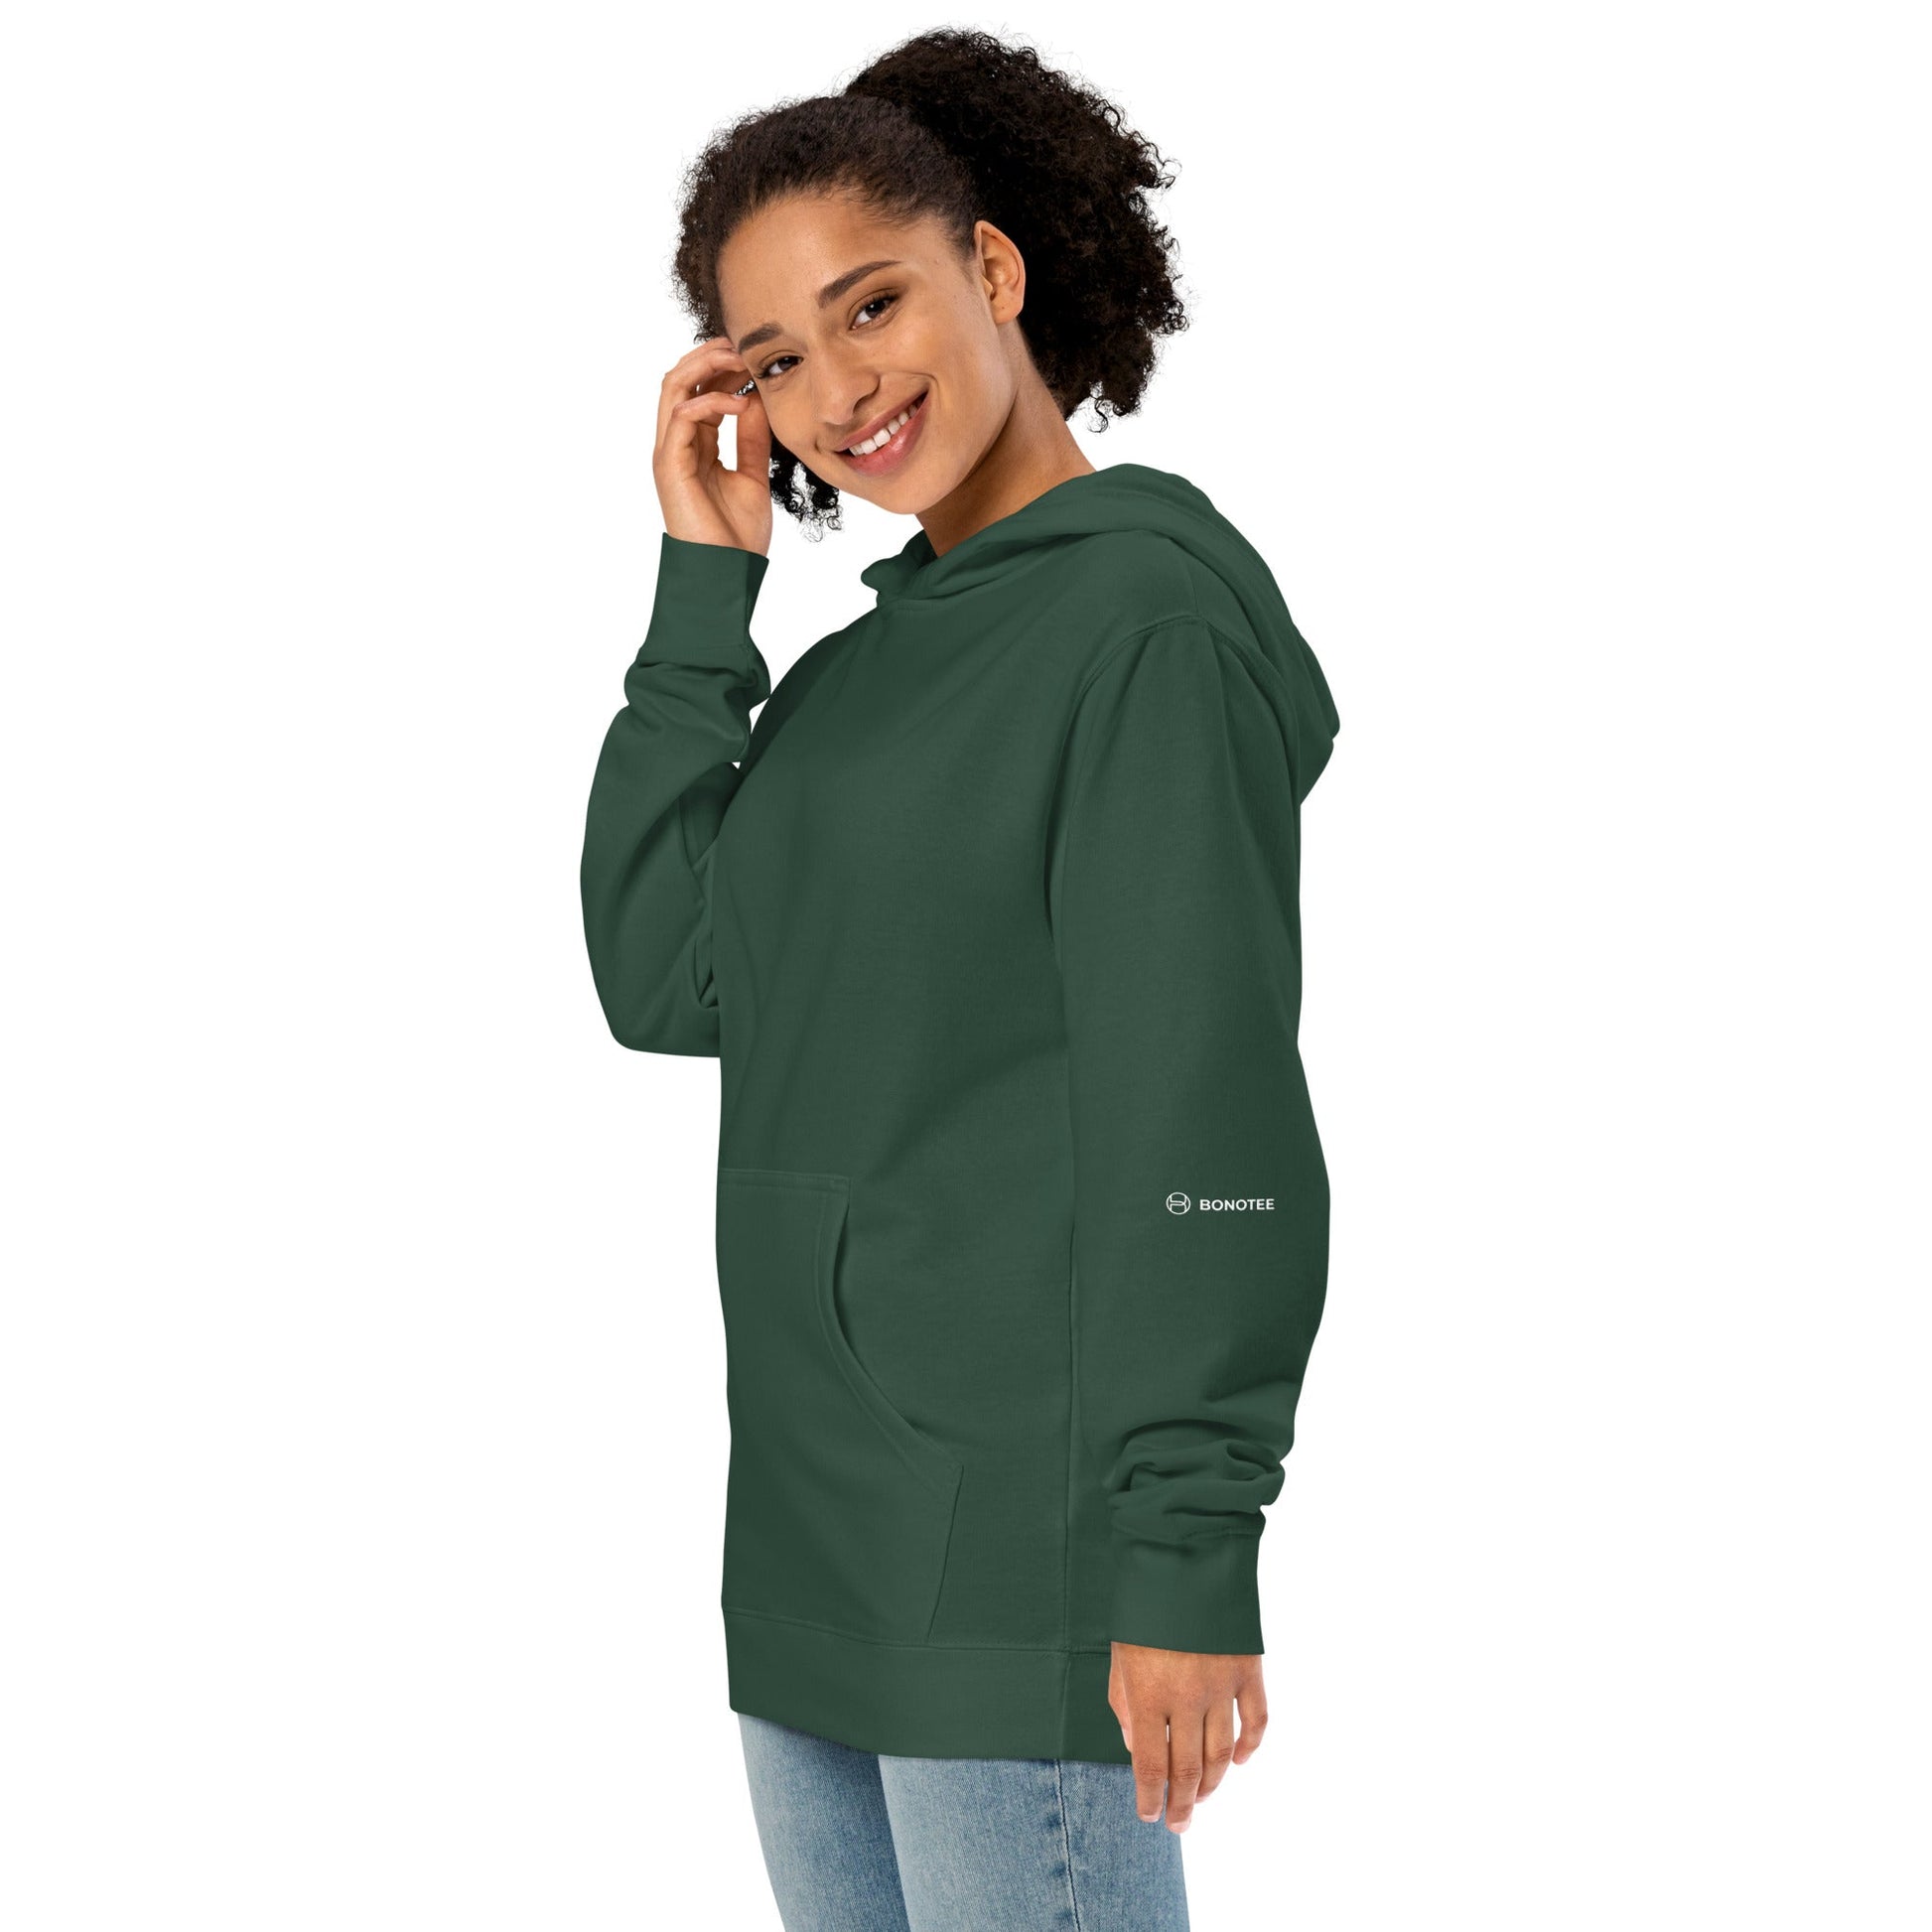 unisex-midweight-hoodie-the-idea-of-waiting-alpine-green